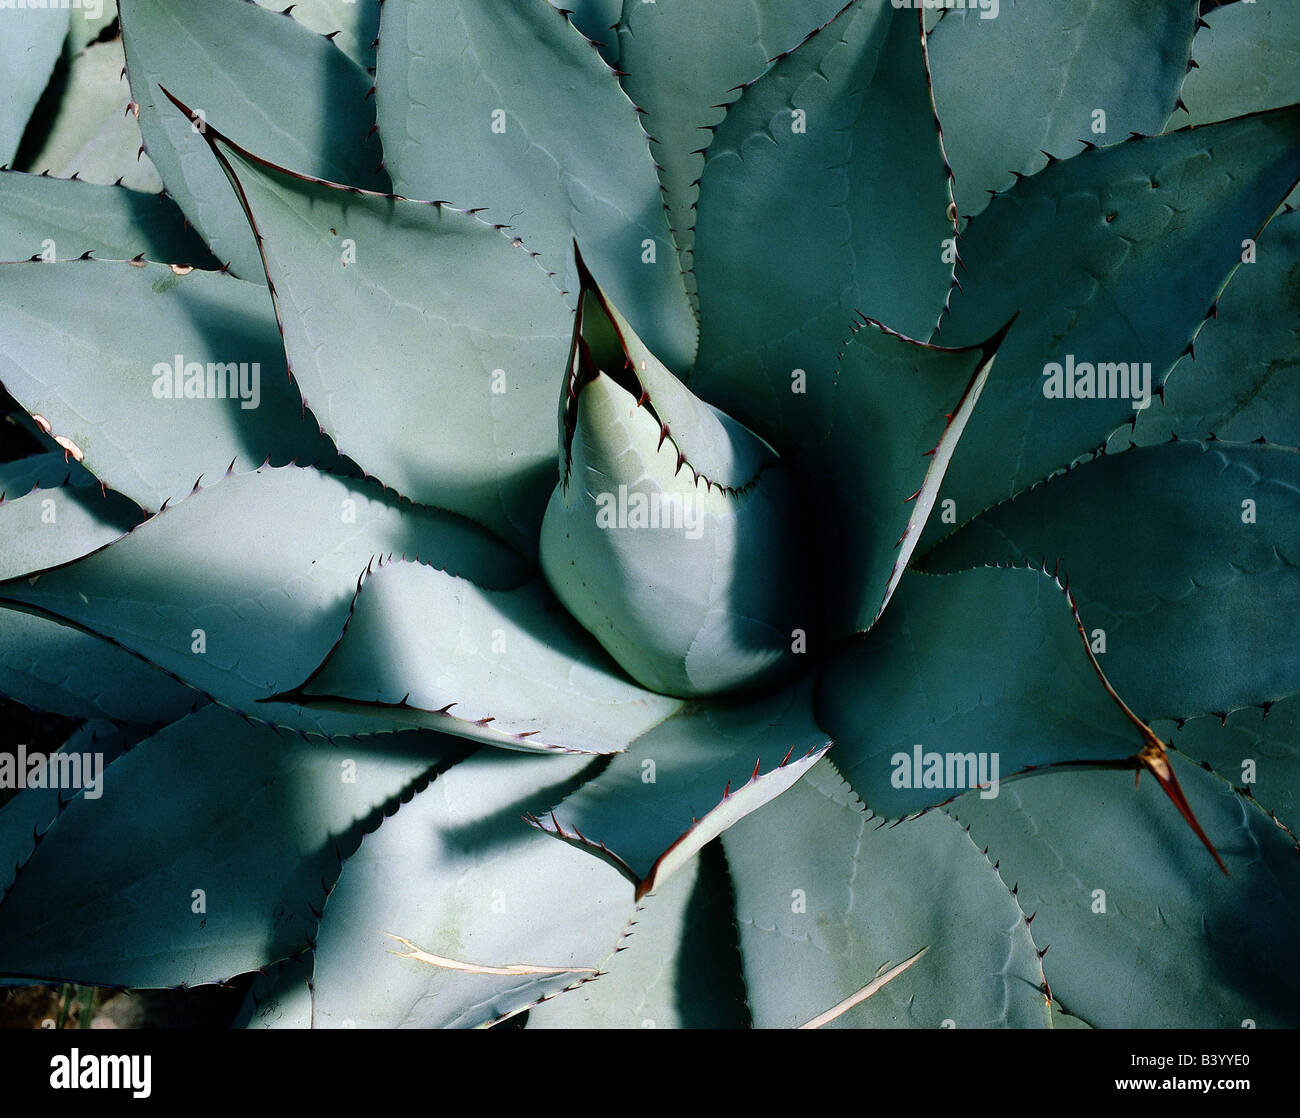 botany, Agave, Century plant, leaves, with thorns, thorn, leaf, Agavaceae, Liliidae, Liliales, Maguey, American aloe, Stock Photo